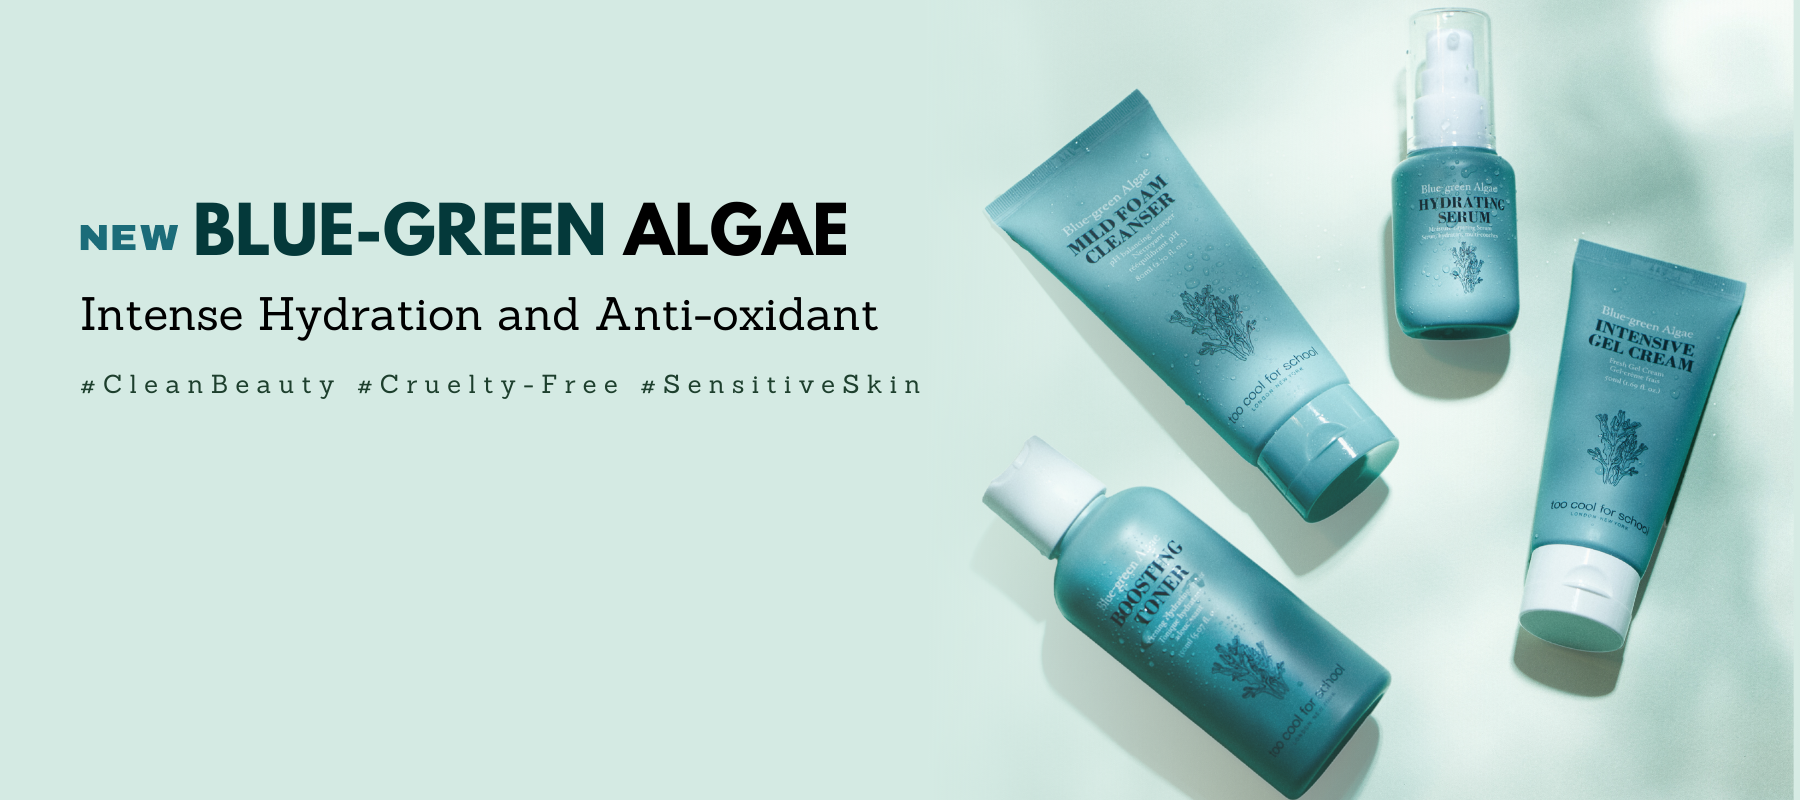 Too Cool For School Blue Algae Collection for Sensitive and dry skin